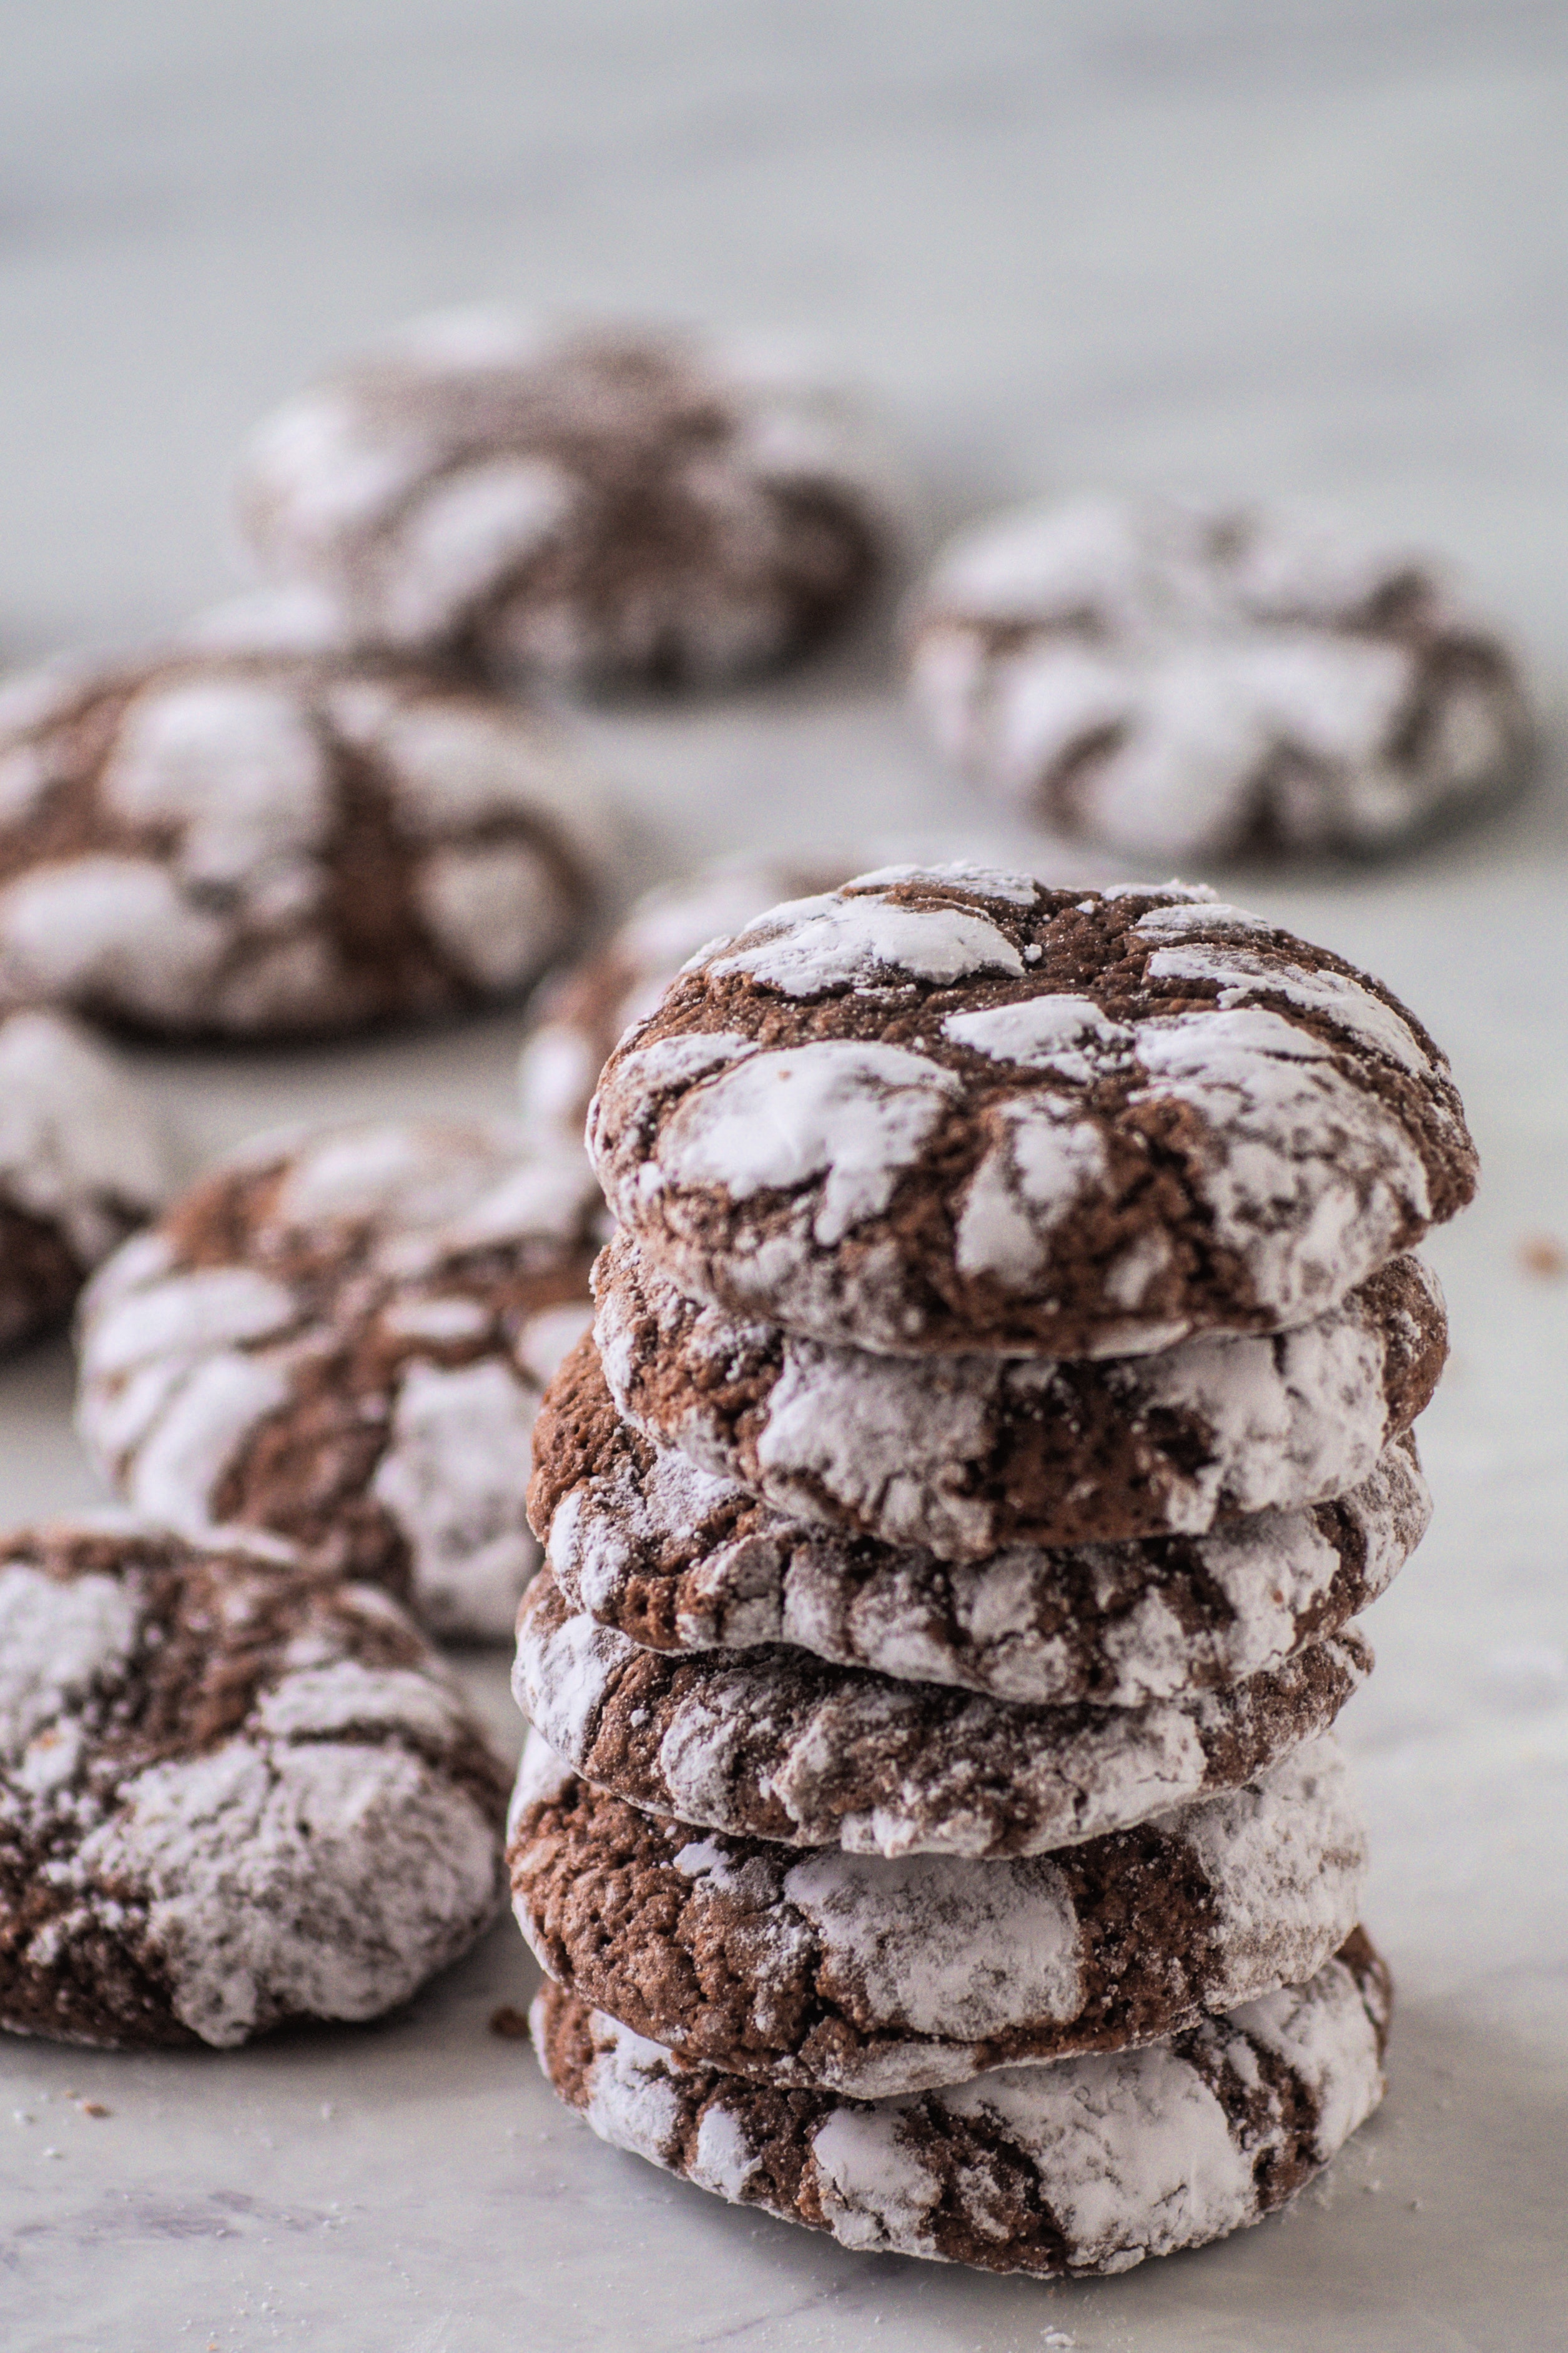 These Chocolate Crinkle Cookies are a classic chocolate cookie. The cookies are soft and chewy, with a gooey center, like a fudgy brownie. This dairy free cookie is easy and fun to make and will satisfy your sweet tooth. They are a traditional Christmas cookie, but tasty enough to make year round! #chocolatecookies #crinklecookies